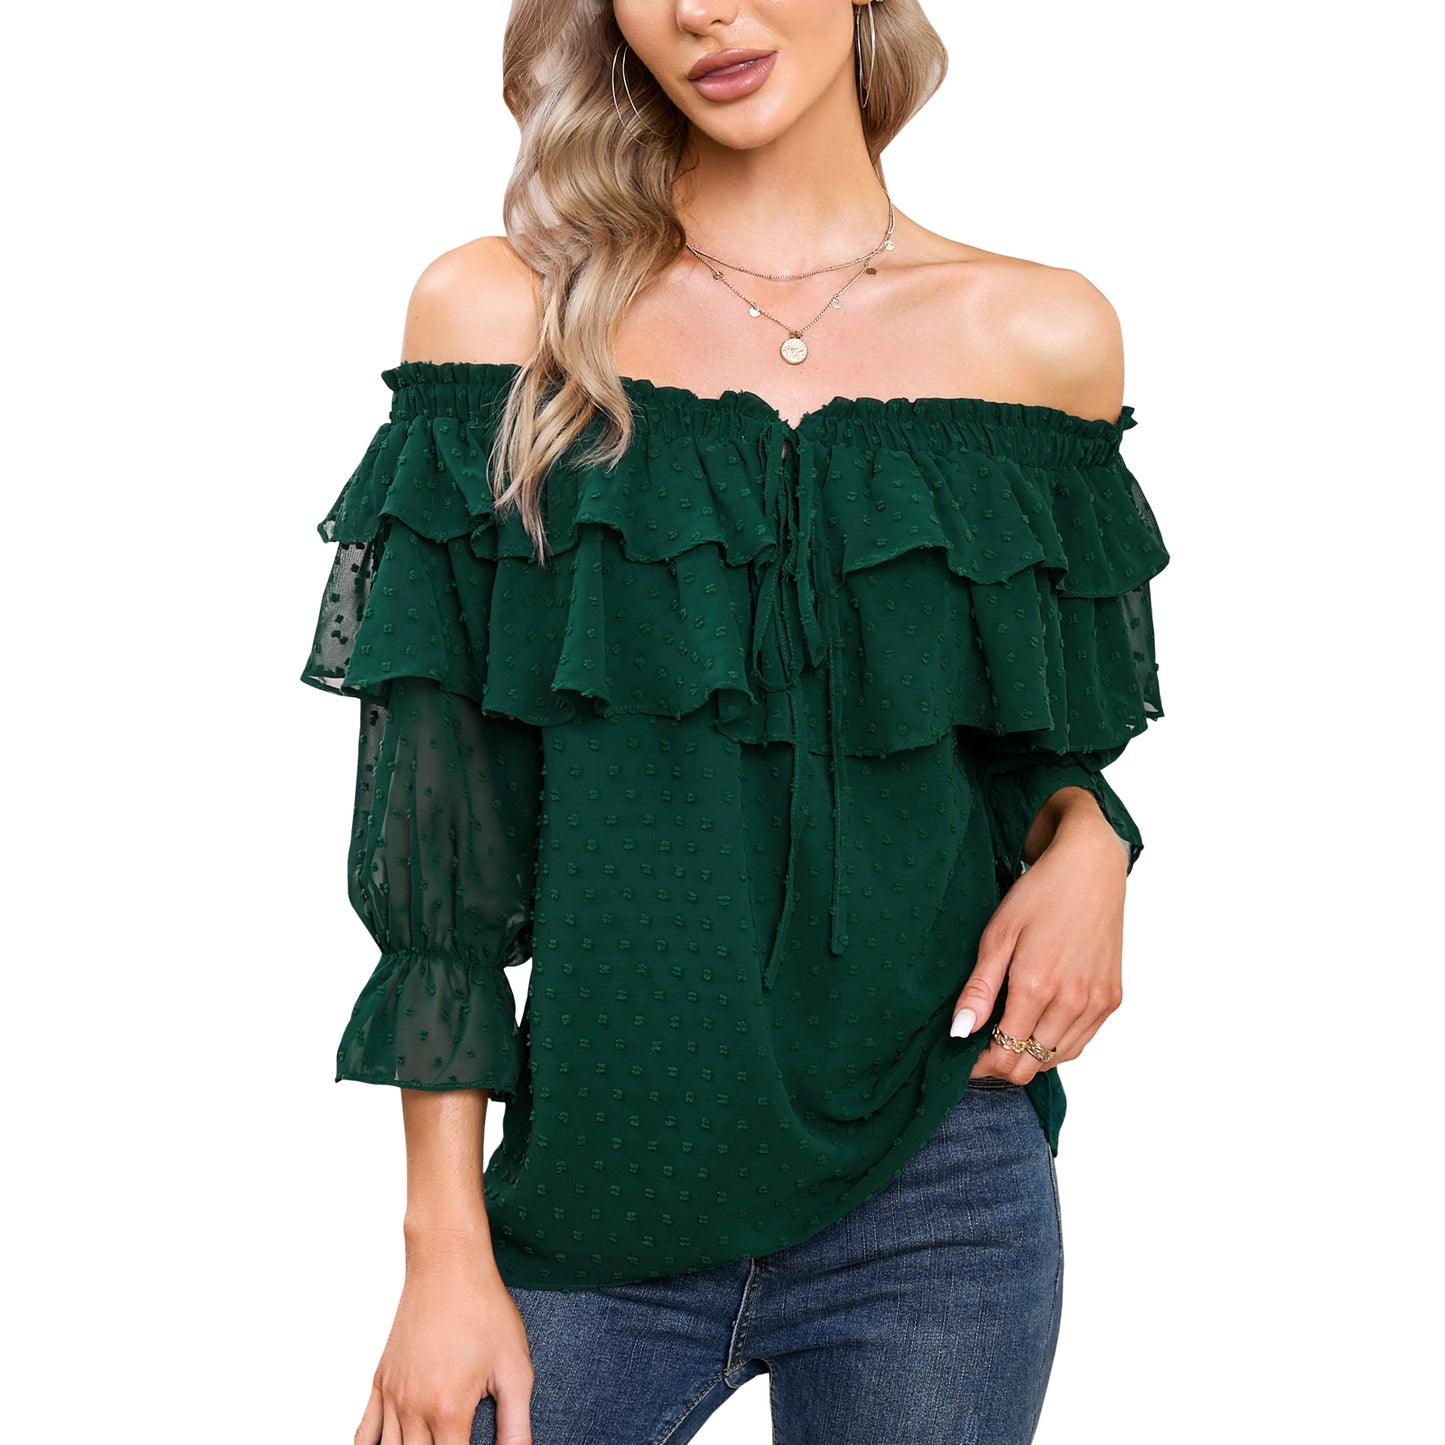 EXLURA Women’s Off The Shoulder Layered Ruffle Tops Swiss Dot Long Puff Sleeve Blouses Shirts Flowy Party Dressy Tops